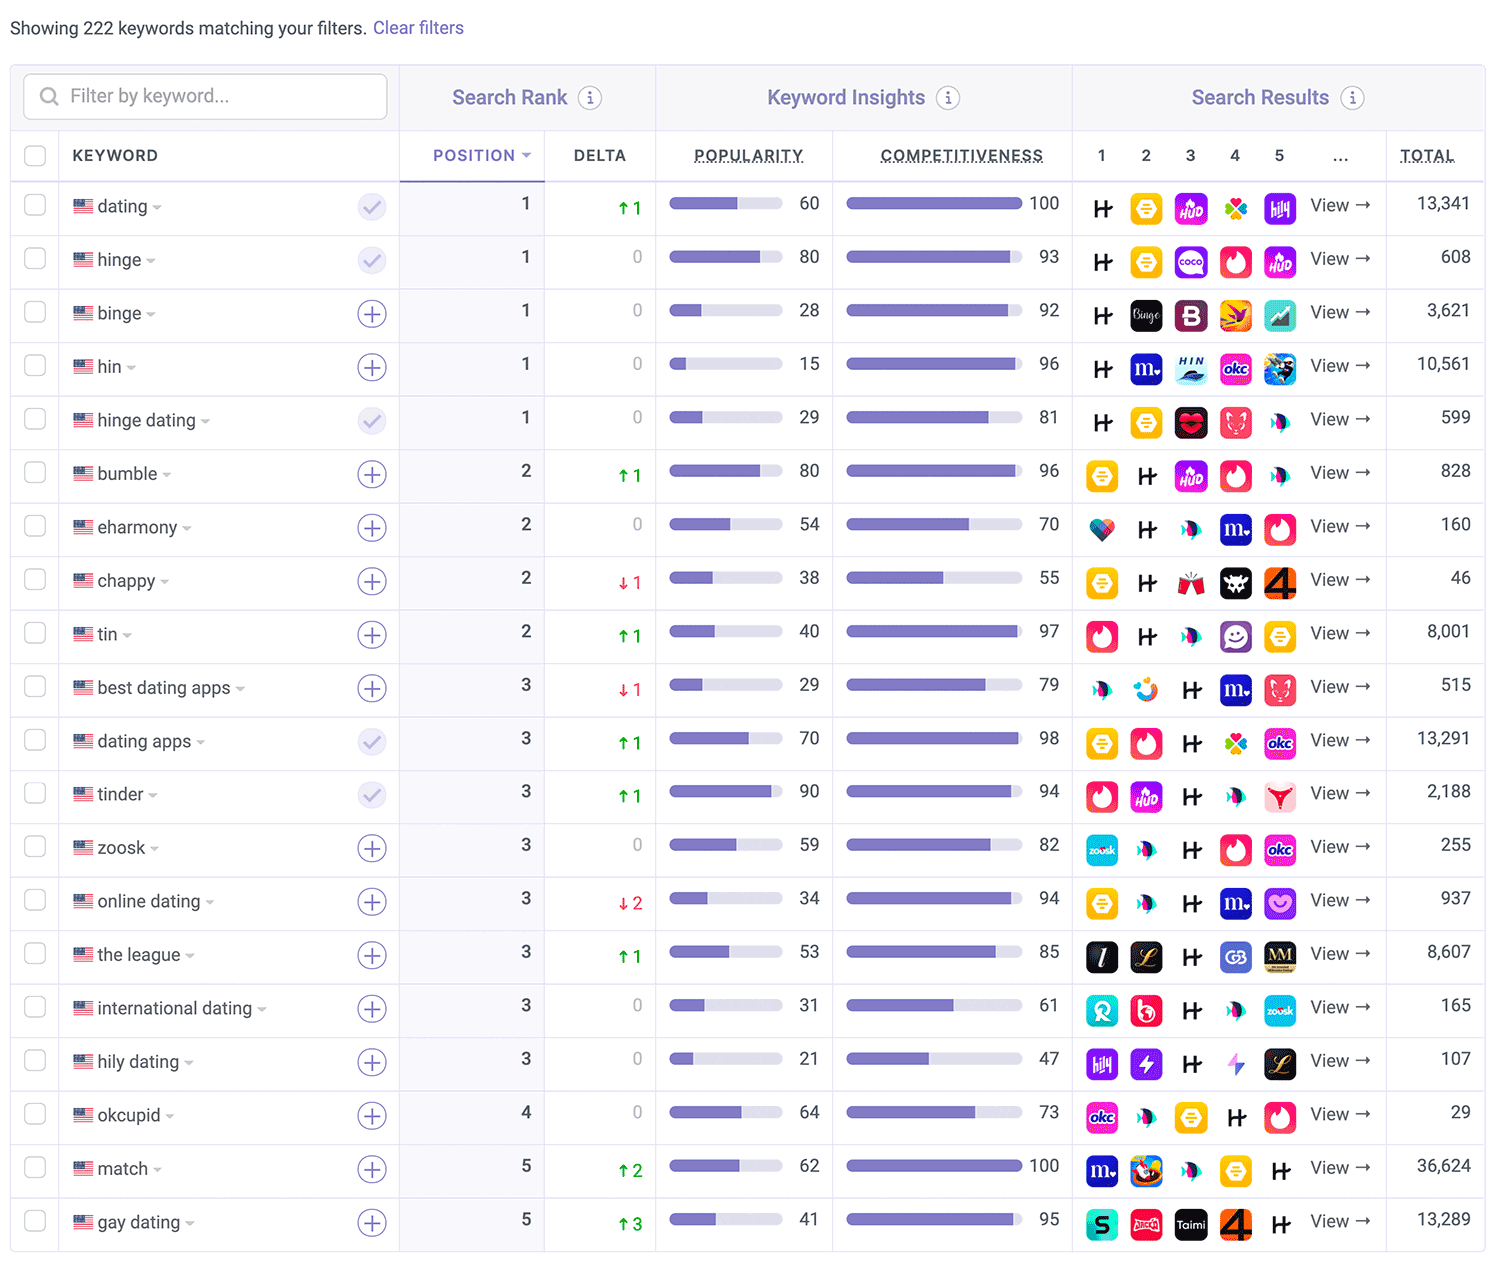 Where Hinge is ranked on the App Store by Appfigures